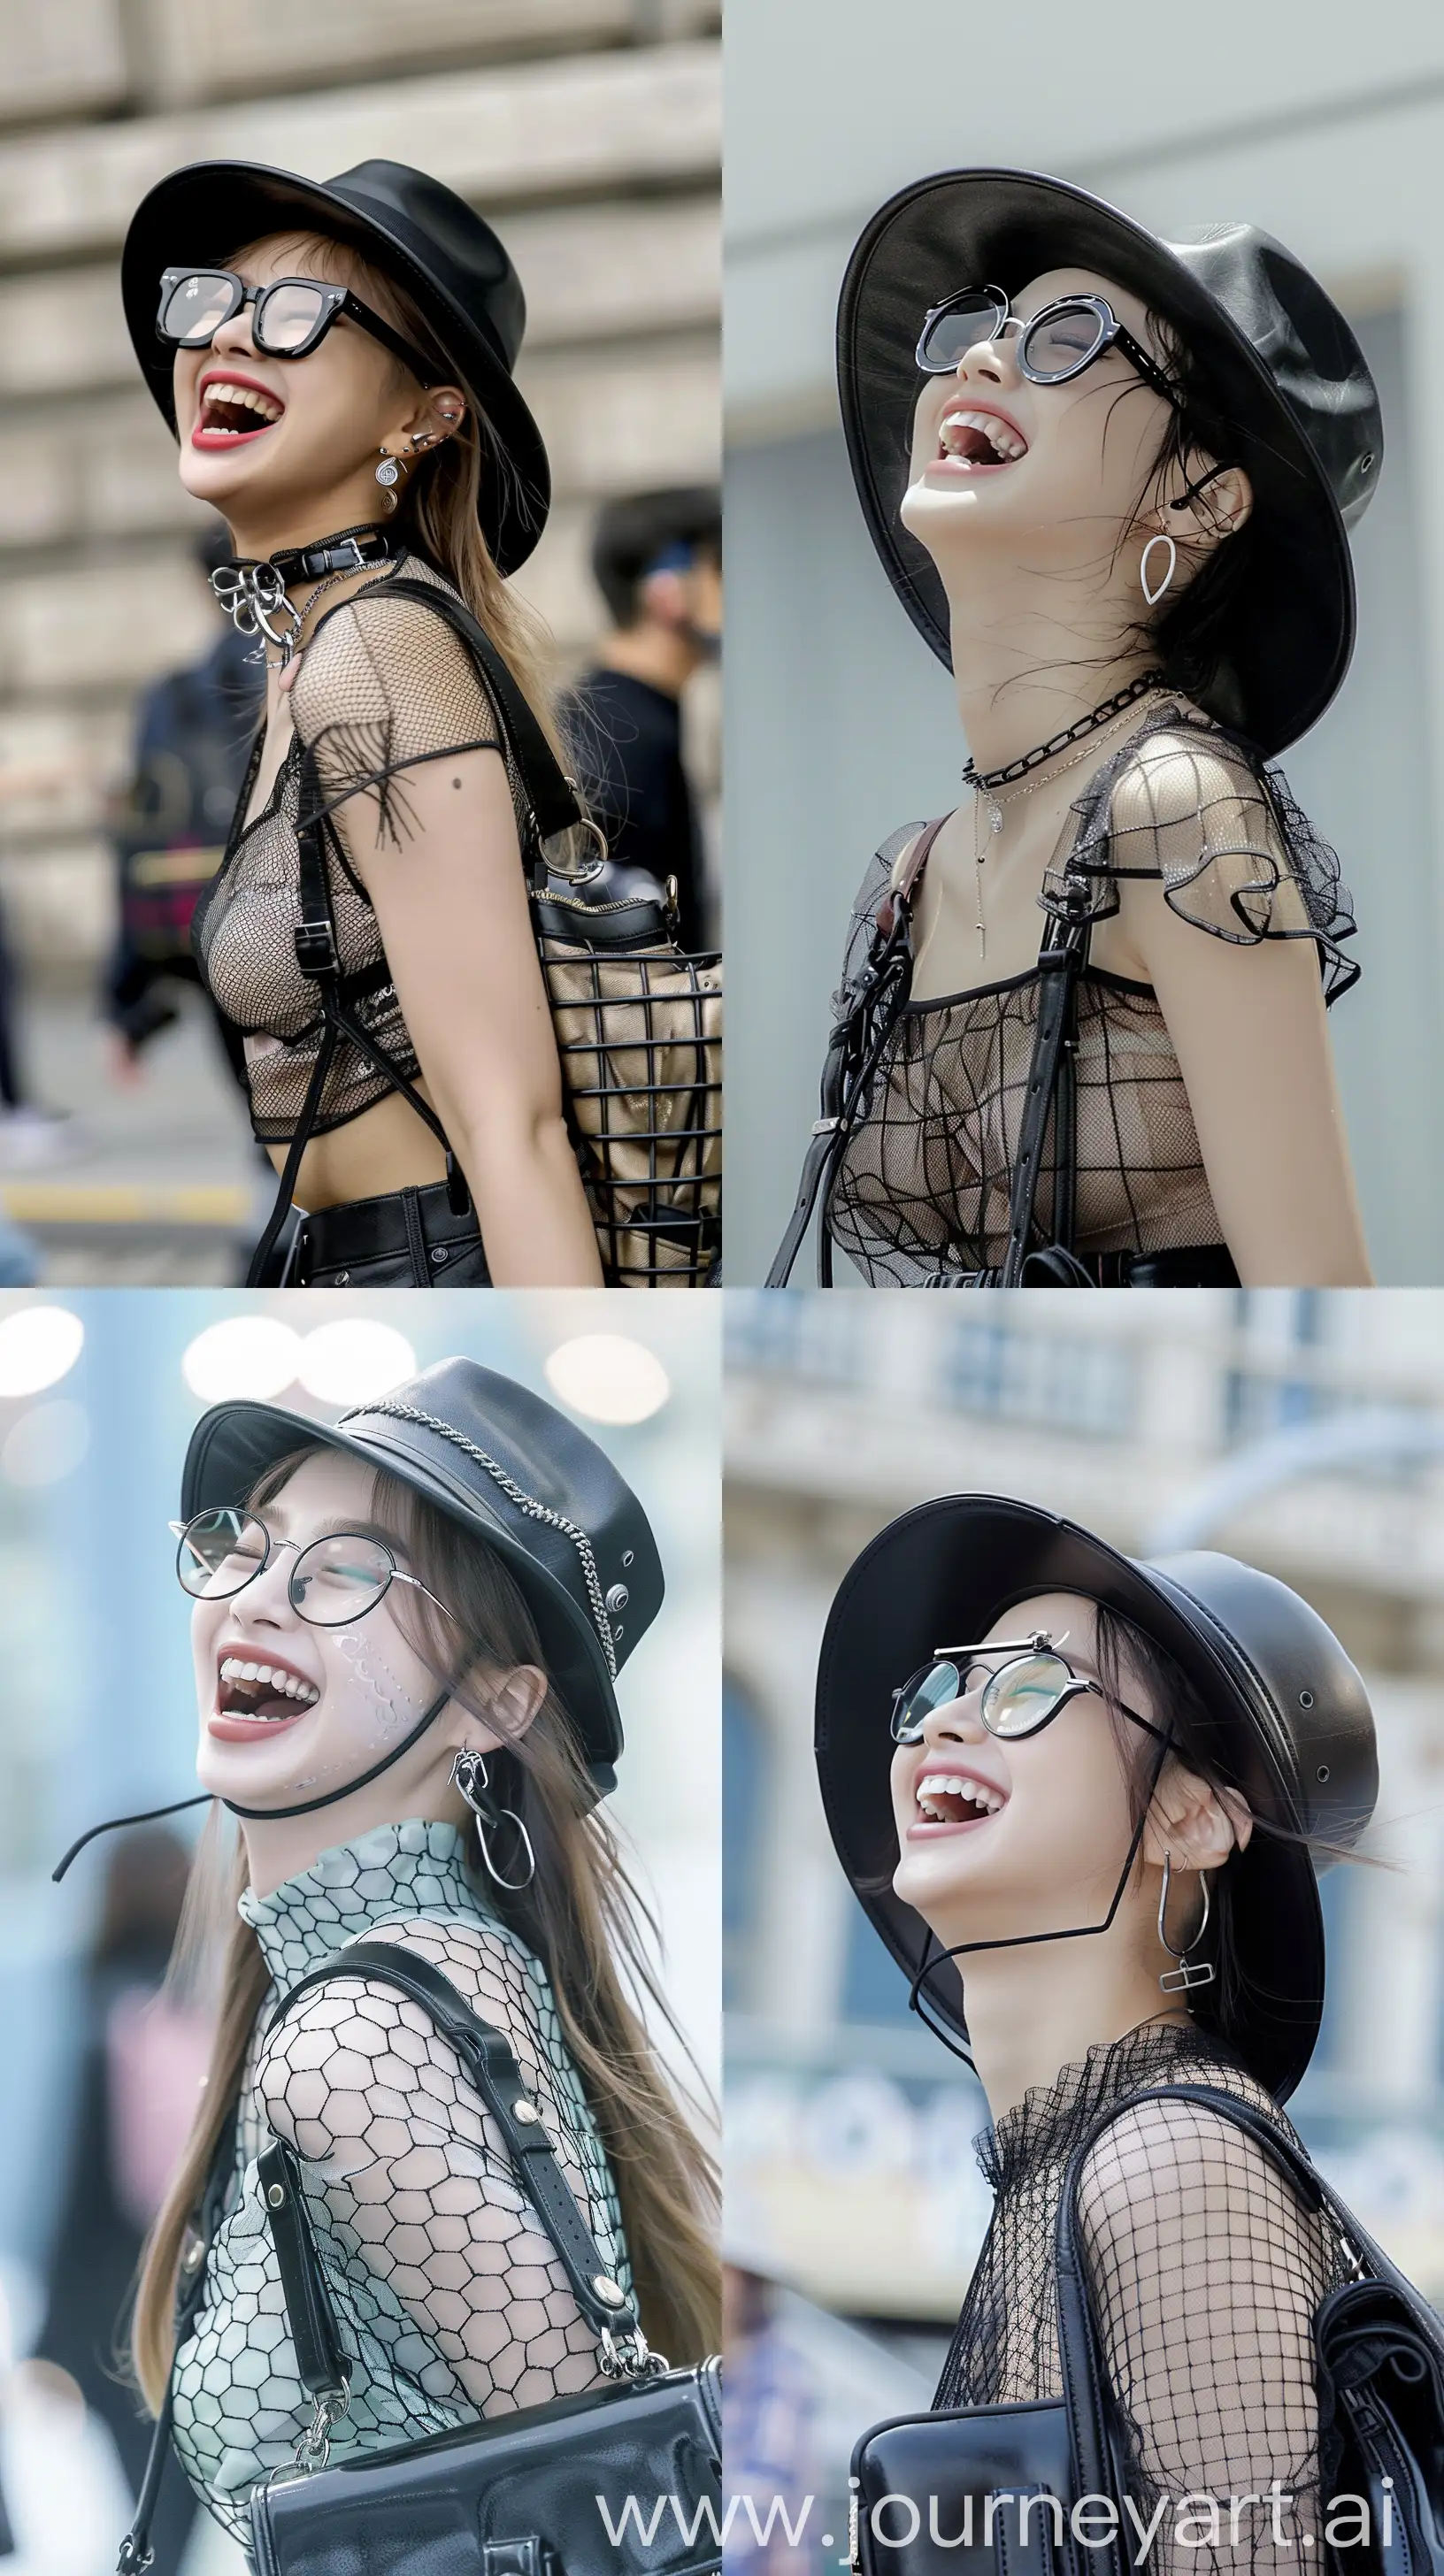 Jennie-from-BLACKPINK-Laughing-in-Aesthetic-Casual-Fashion-While-Walking